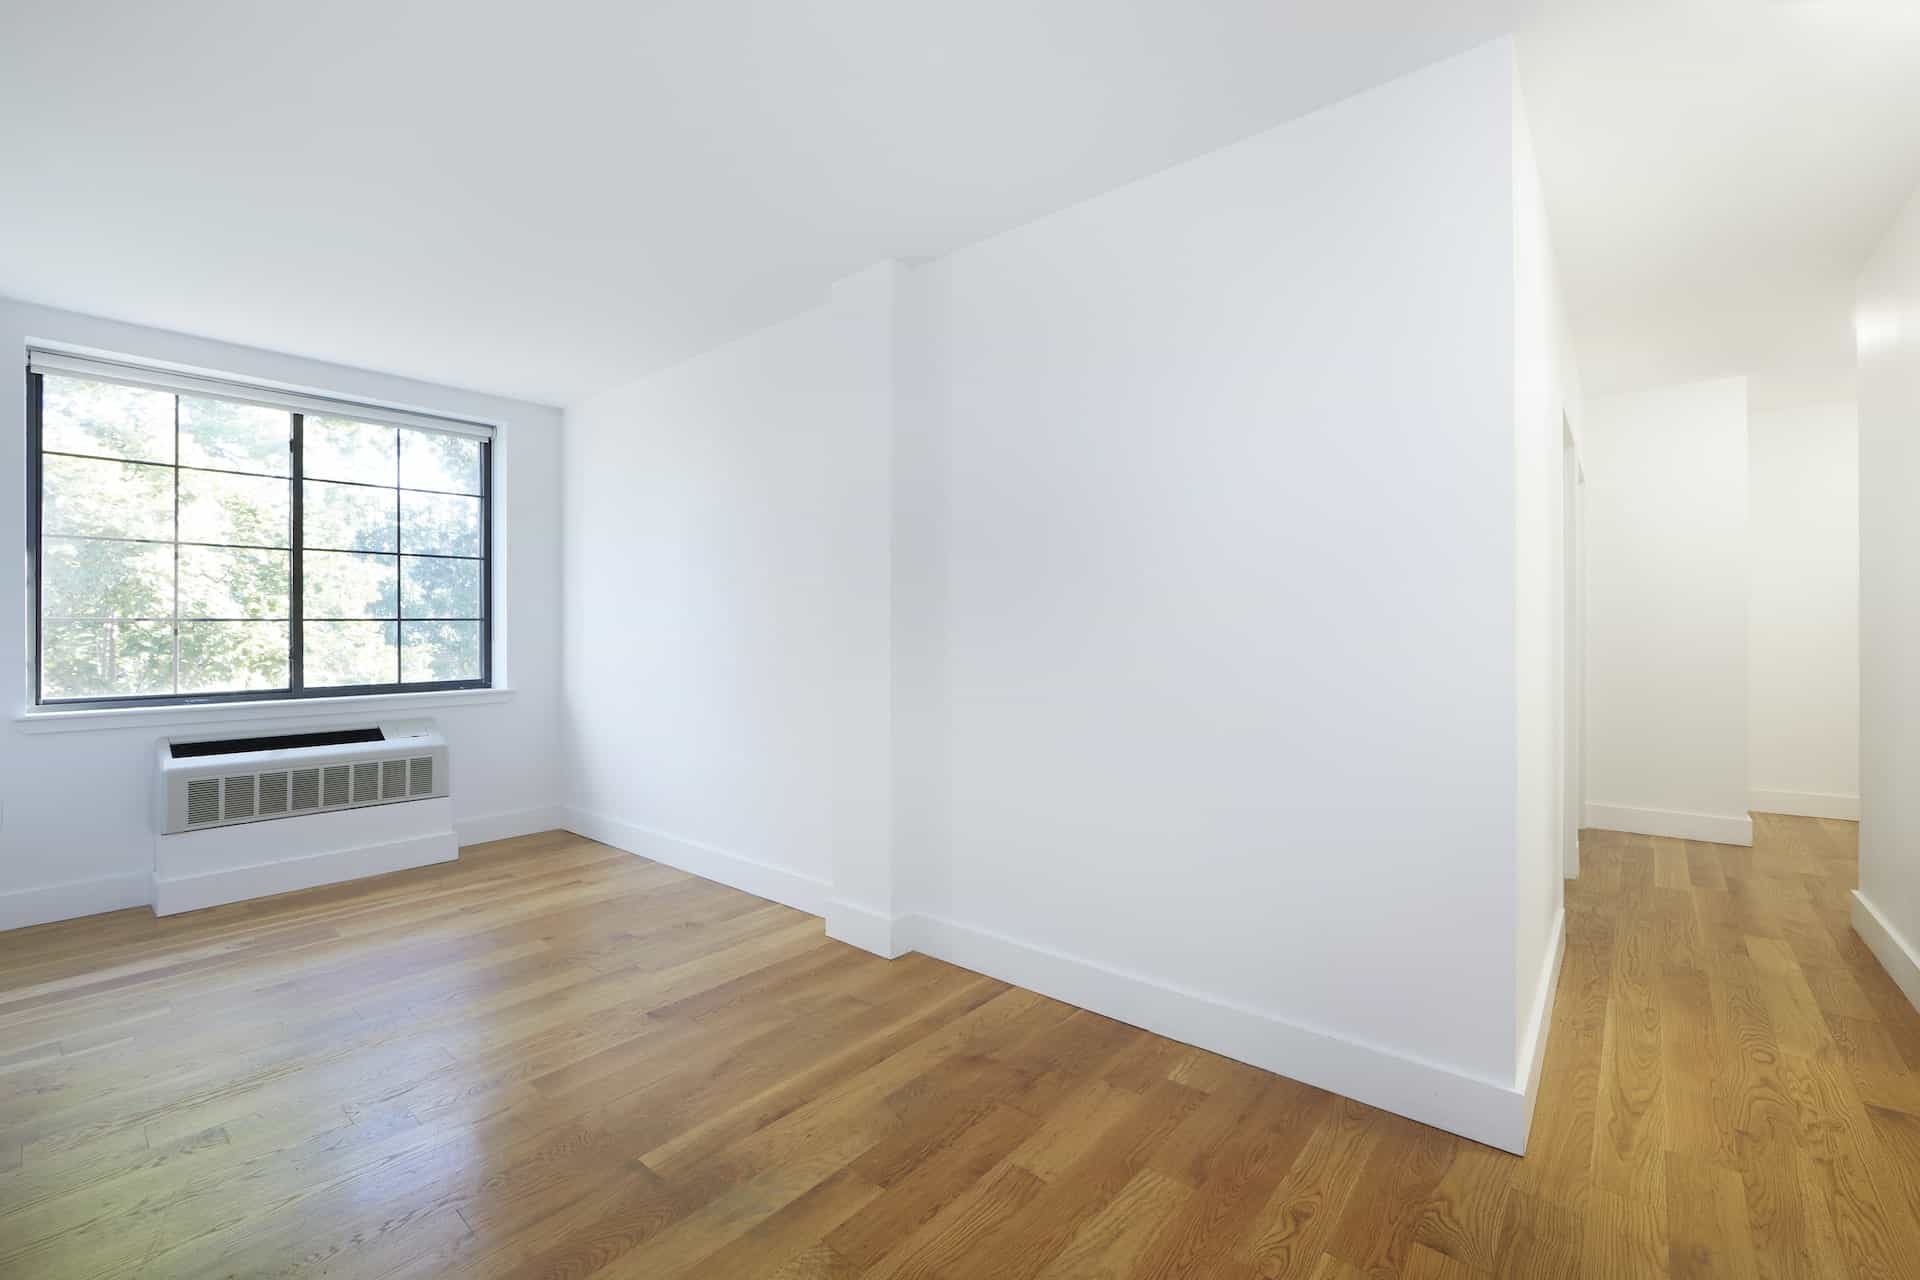 Living room at 83 Bushwick Place apartments in Brooklyn with large windows, hardwood floors, mounted a/c unit and hallway.